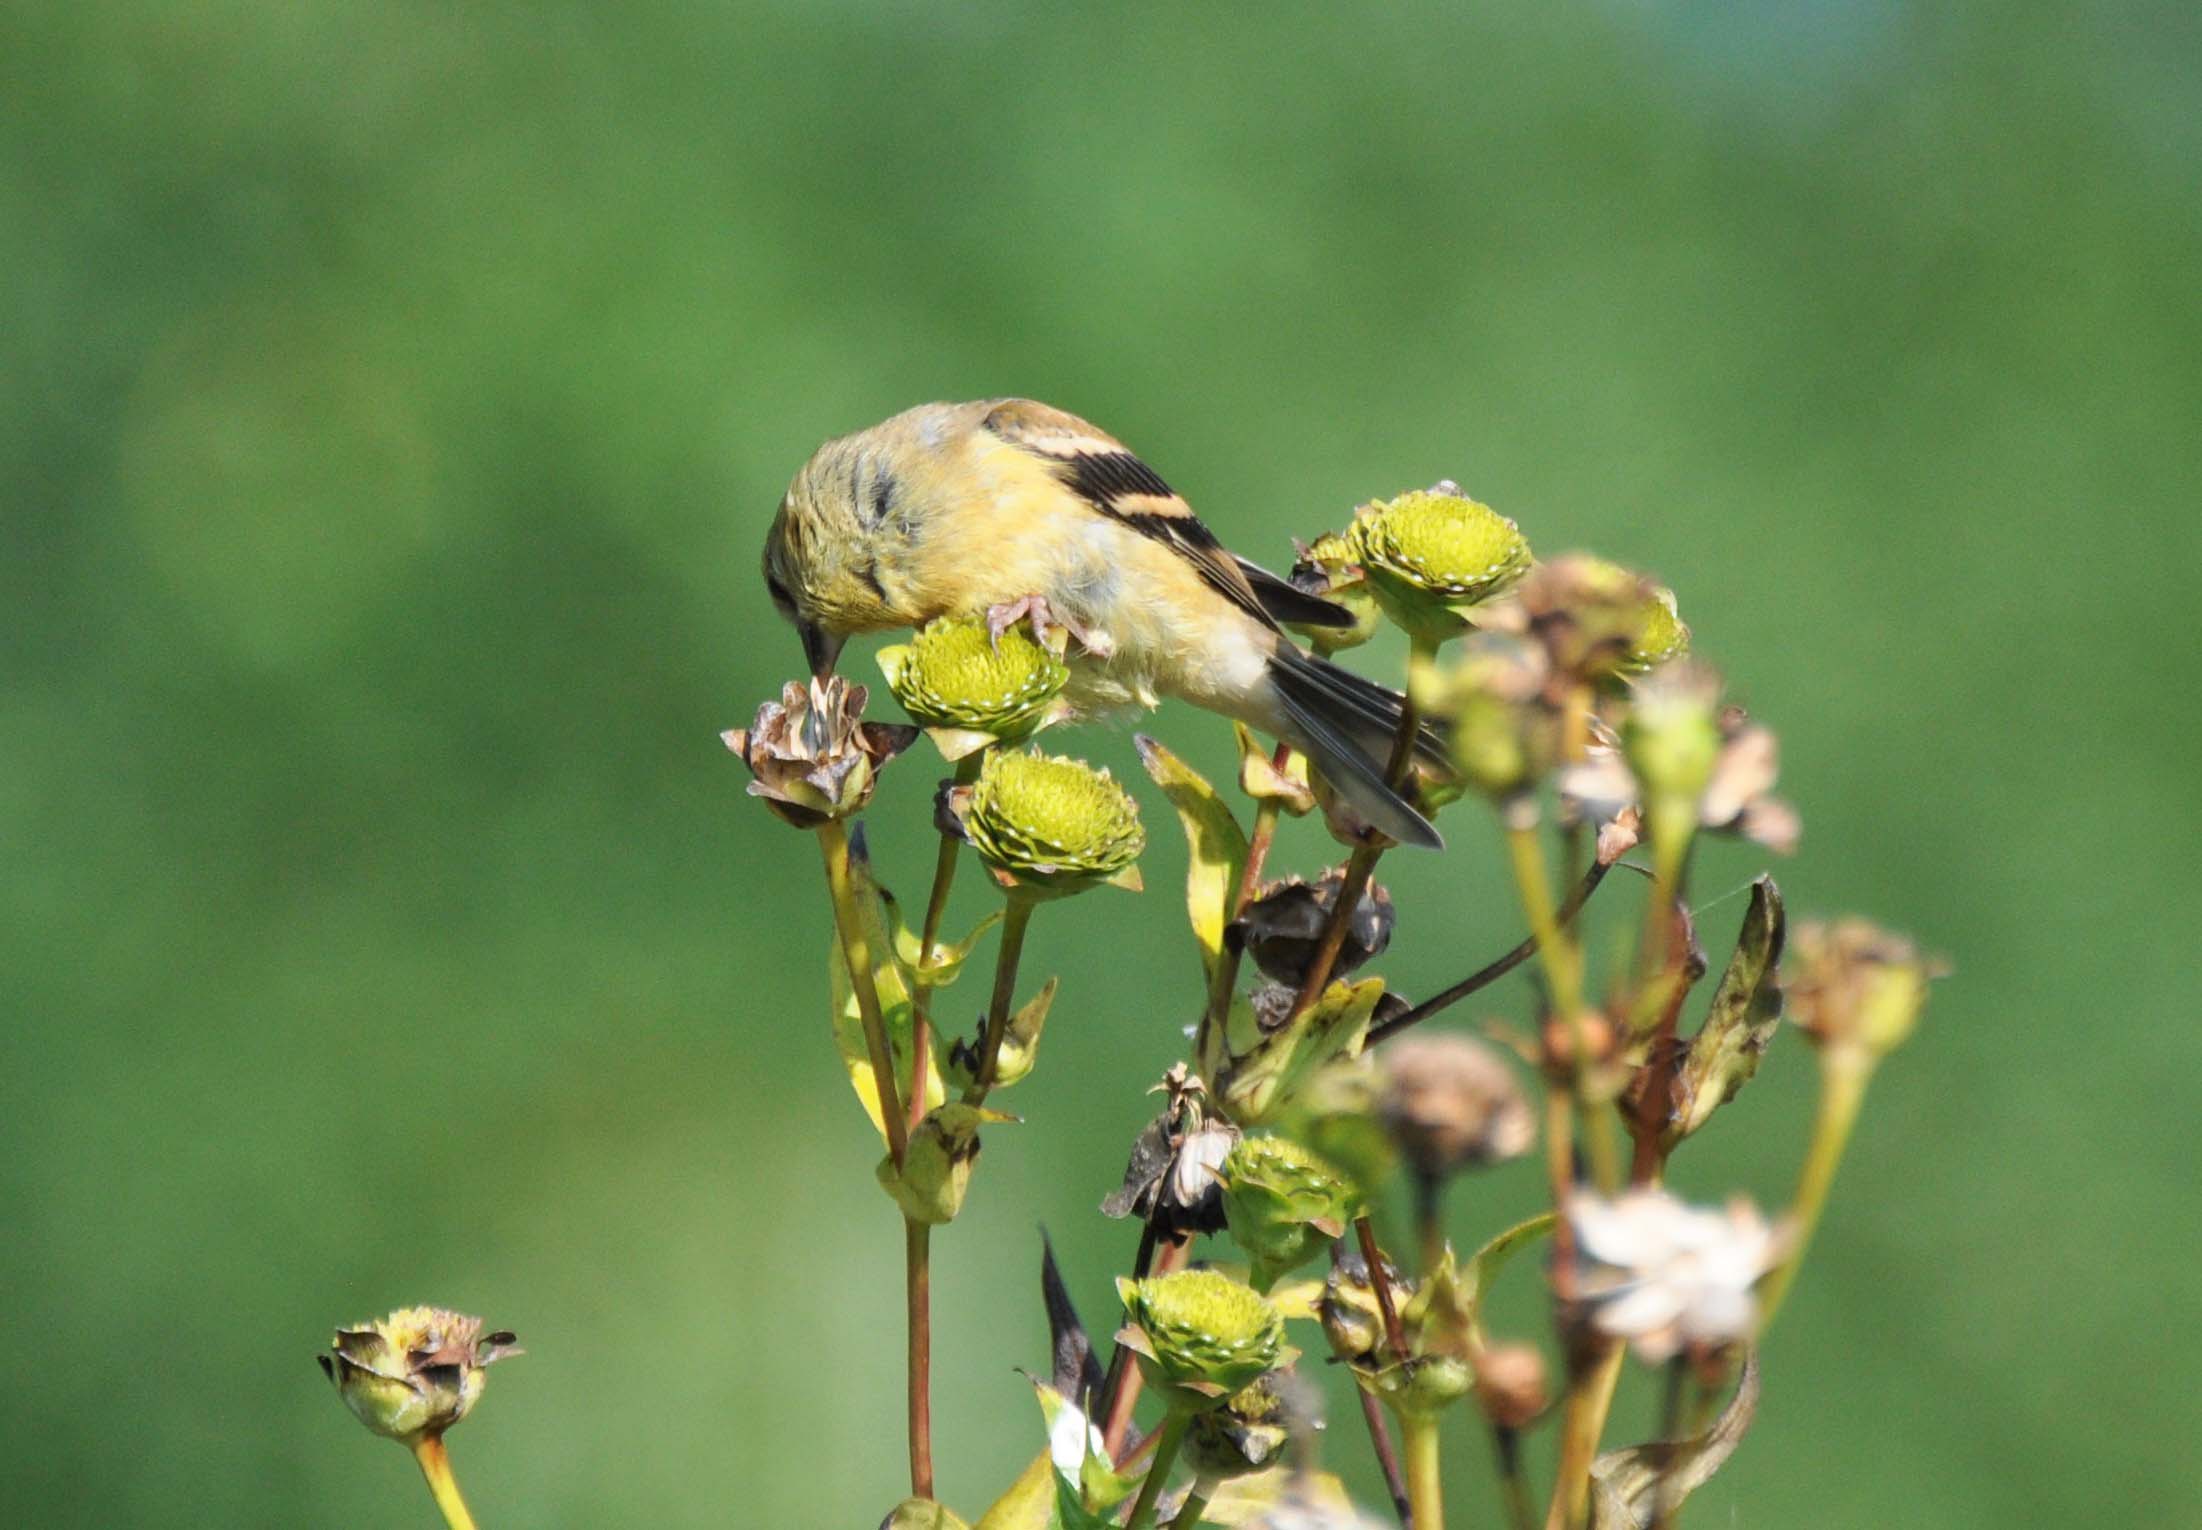 A yellowish bird perched on a plant eating seeds, with an out-of-focus green background